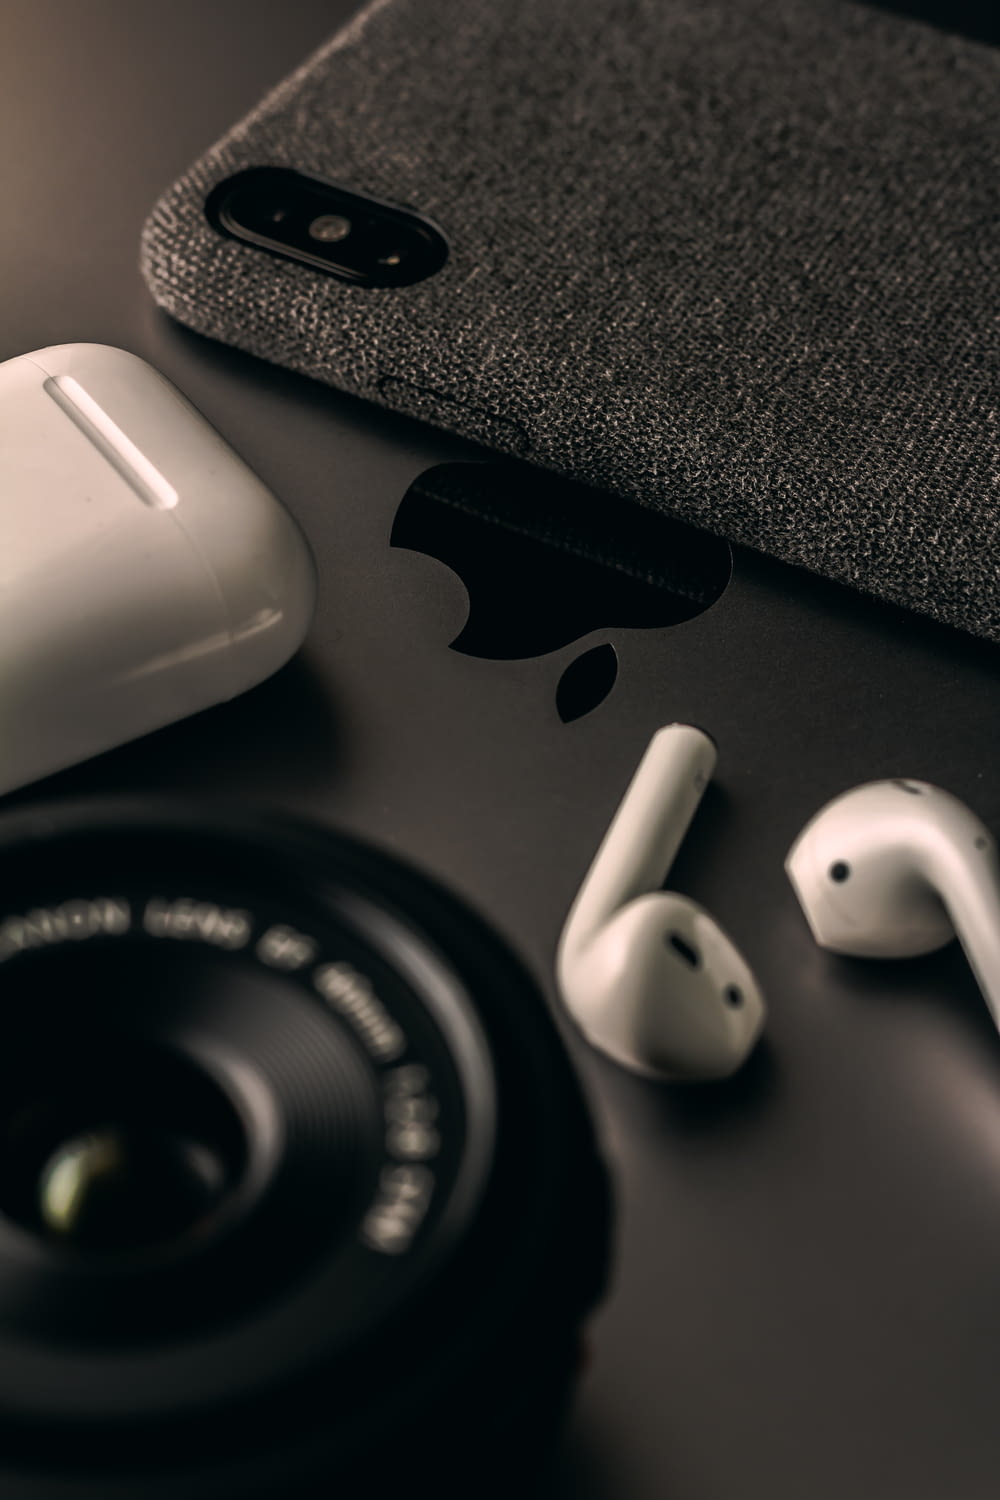 space gray iPhone X beside AirPods